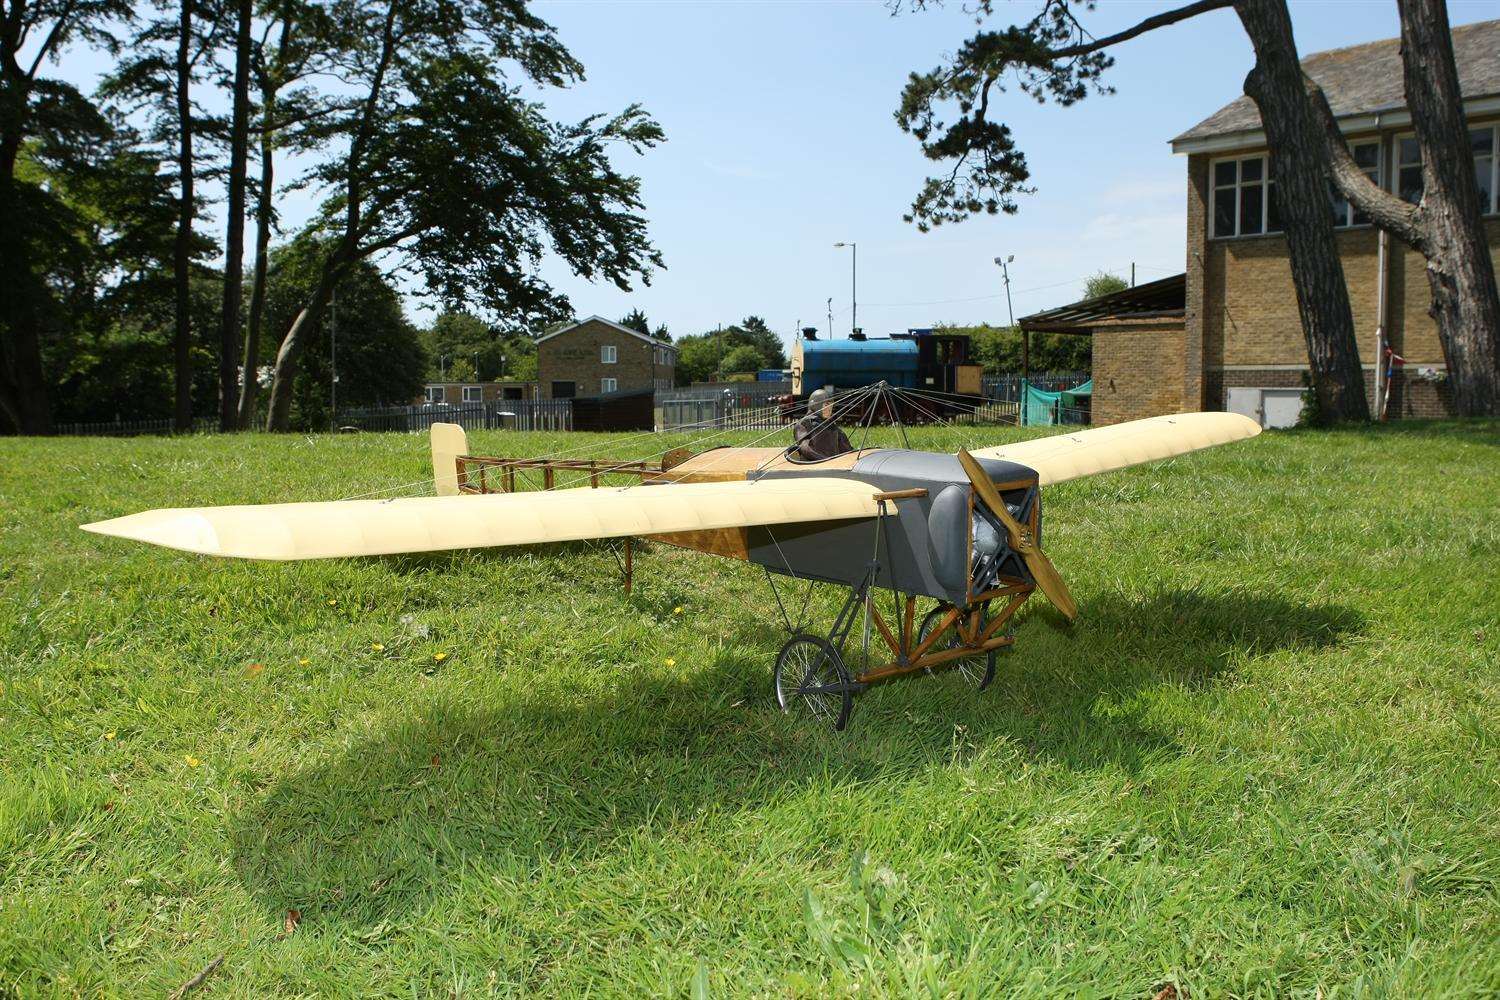 The scale model of the Bleriot model is on show at Dover Transport Museum